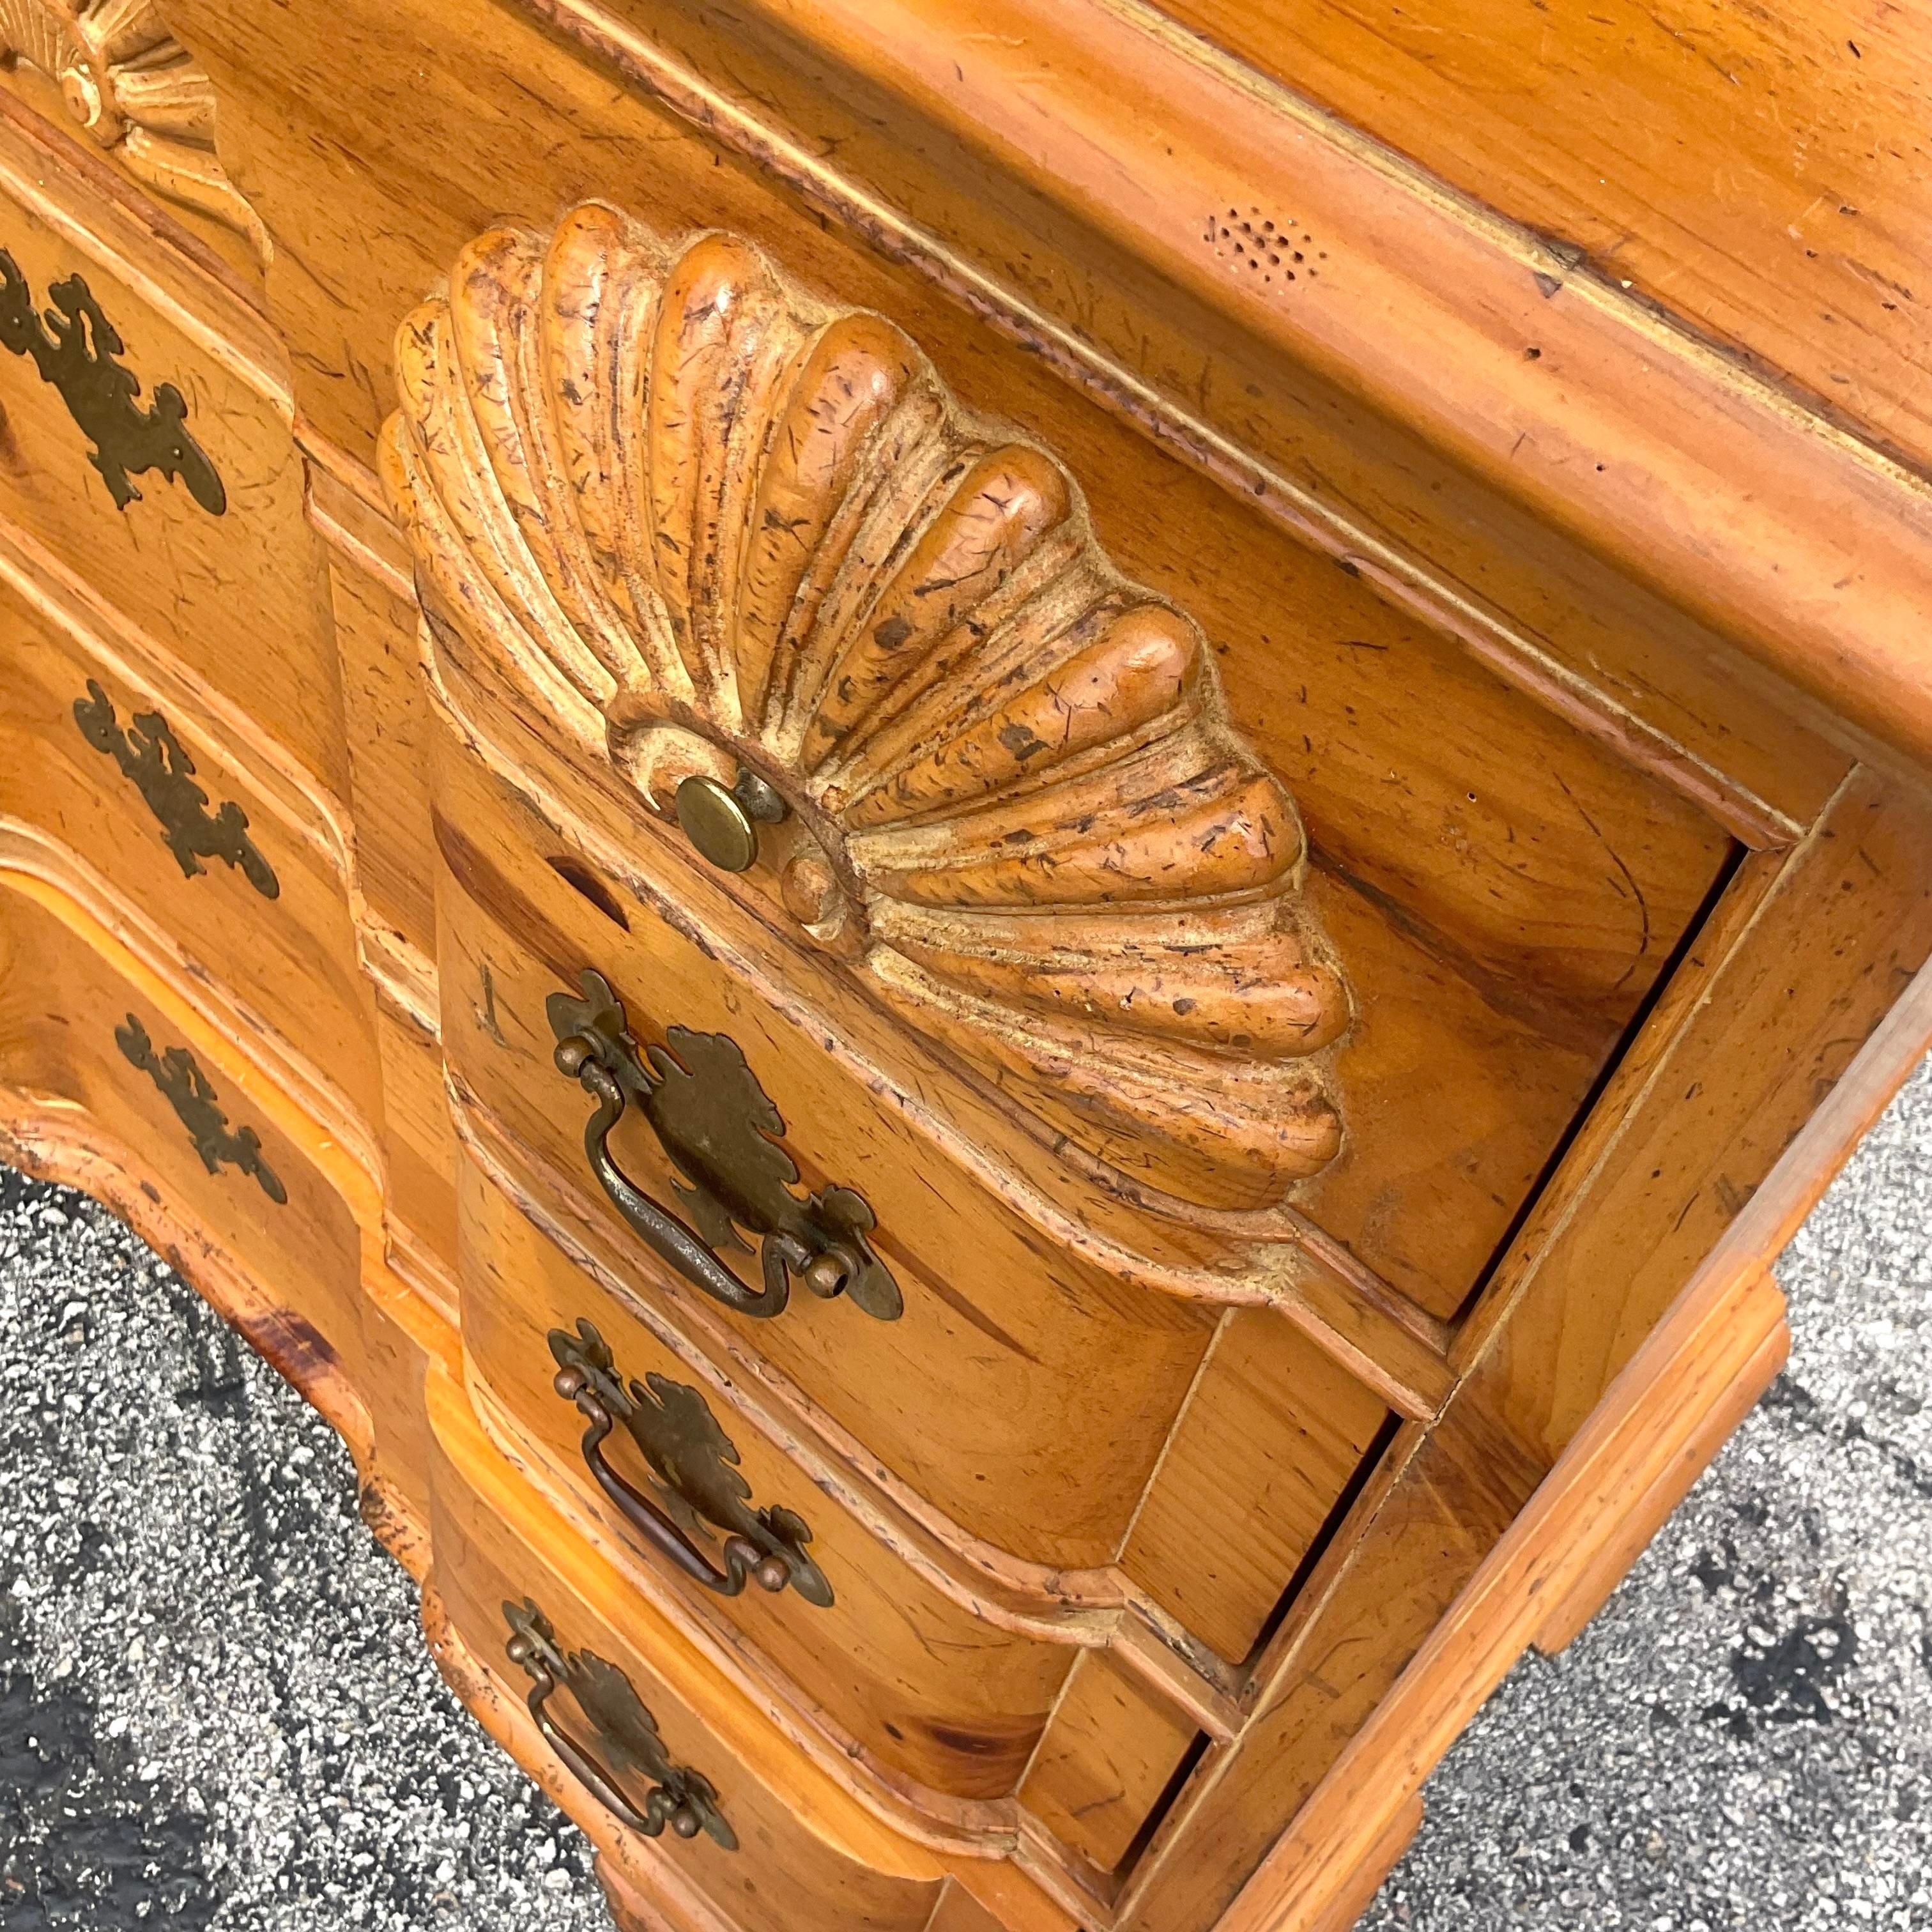 Elevate your coastal-inspired decor with our Vintage Coastal Carved Clam Shell Knotty Pine Chest Of Drawers. Crafted with meticulous attention to detail, this unique piece combines the rustic charm of knotty pine with the whimsical beauty of a